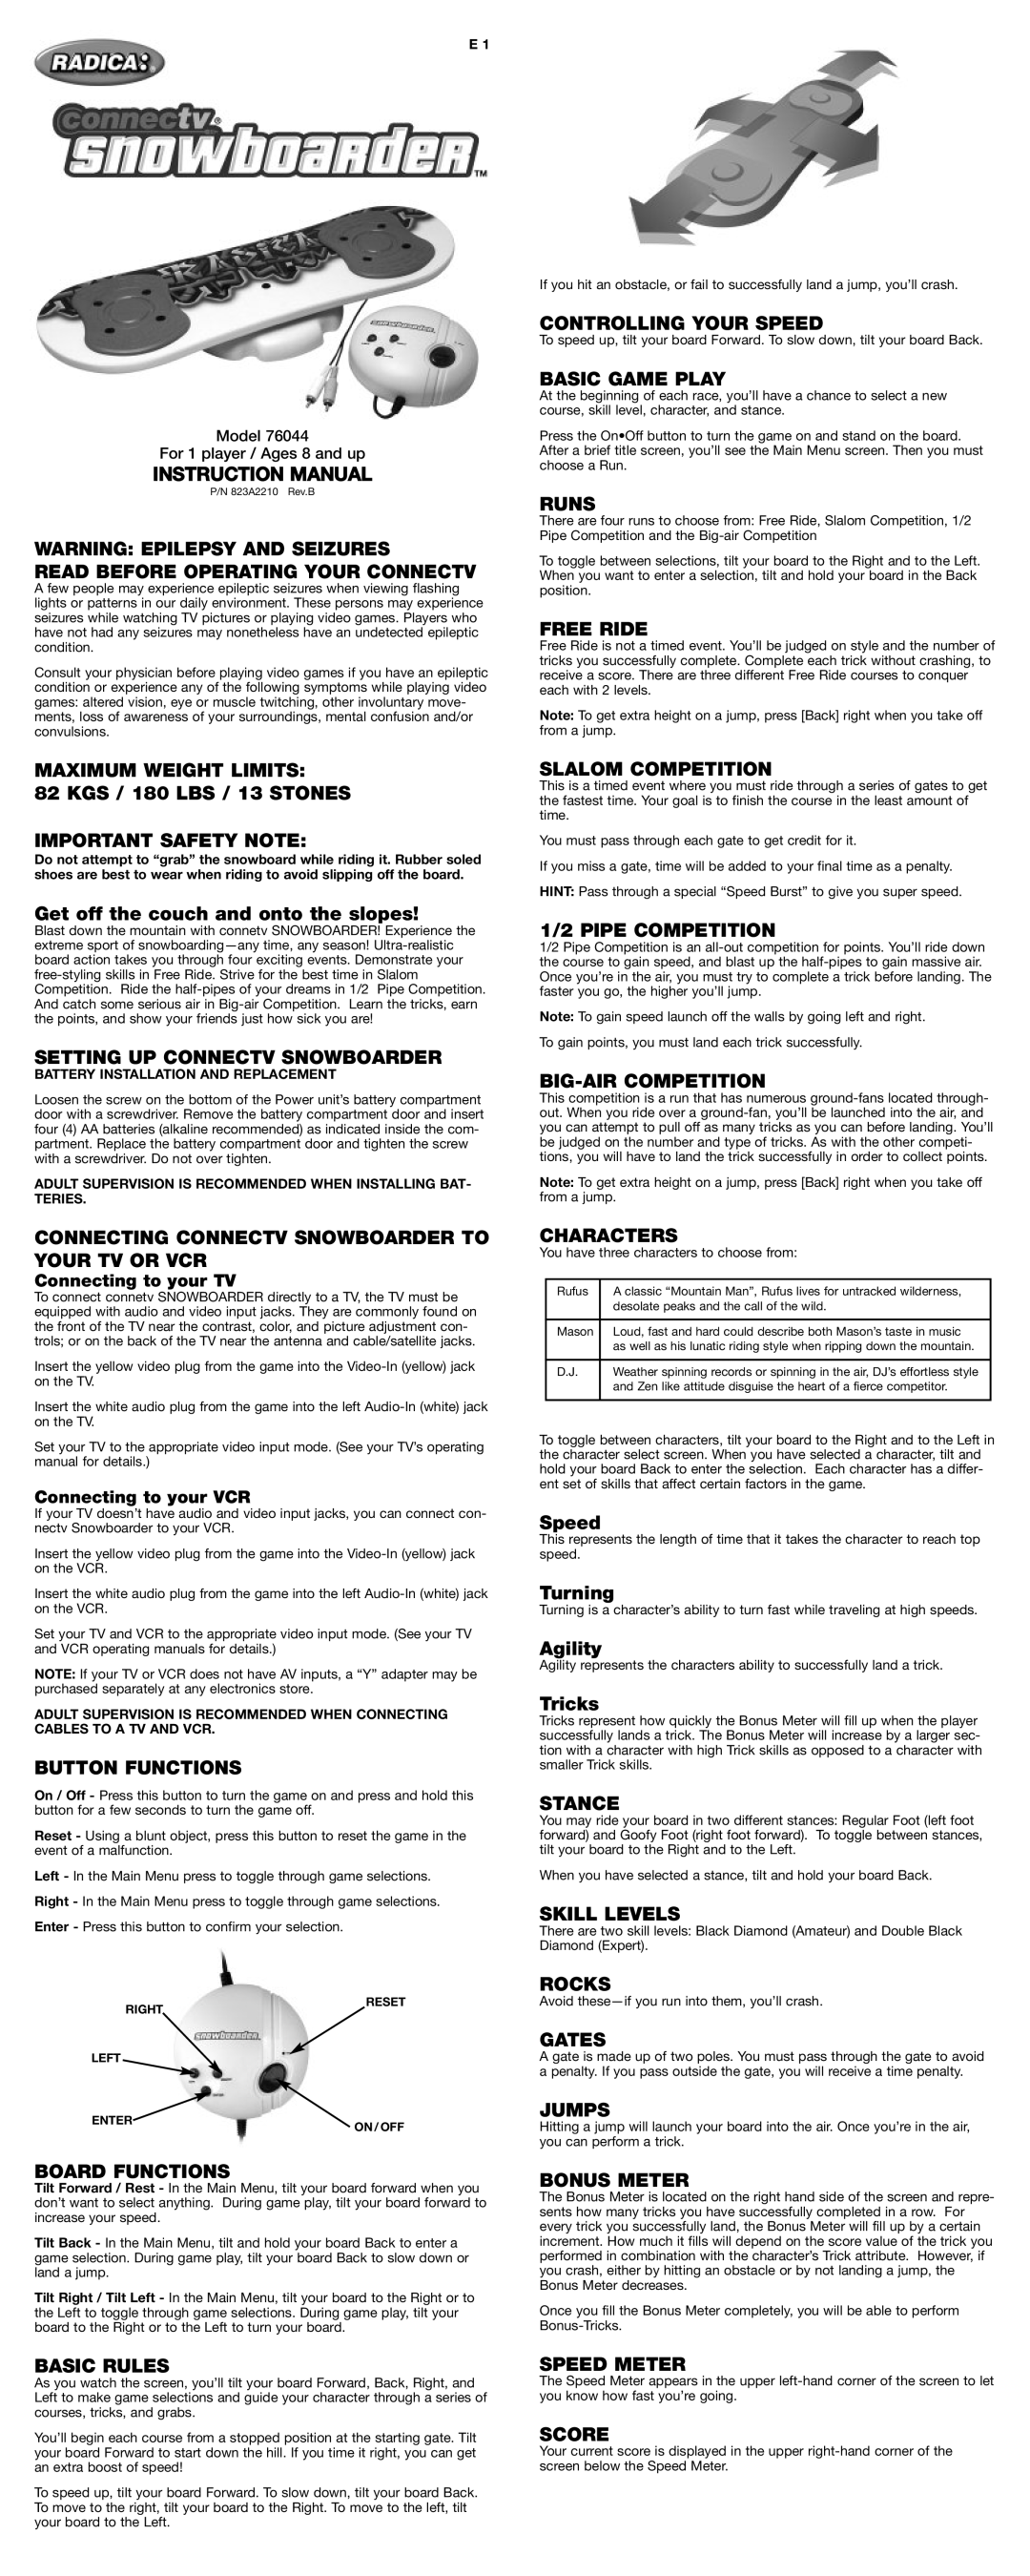 Radica Games 76044 manual Read Before Operating Your Connectv, Maximum Weight Limits, Important Safety Note, Runs, Stance 